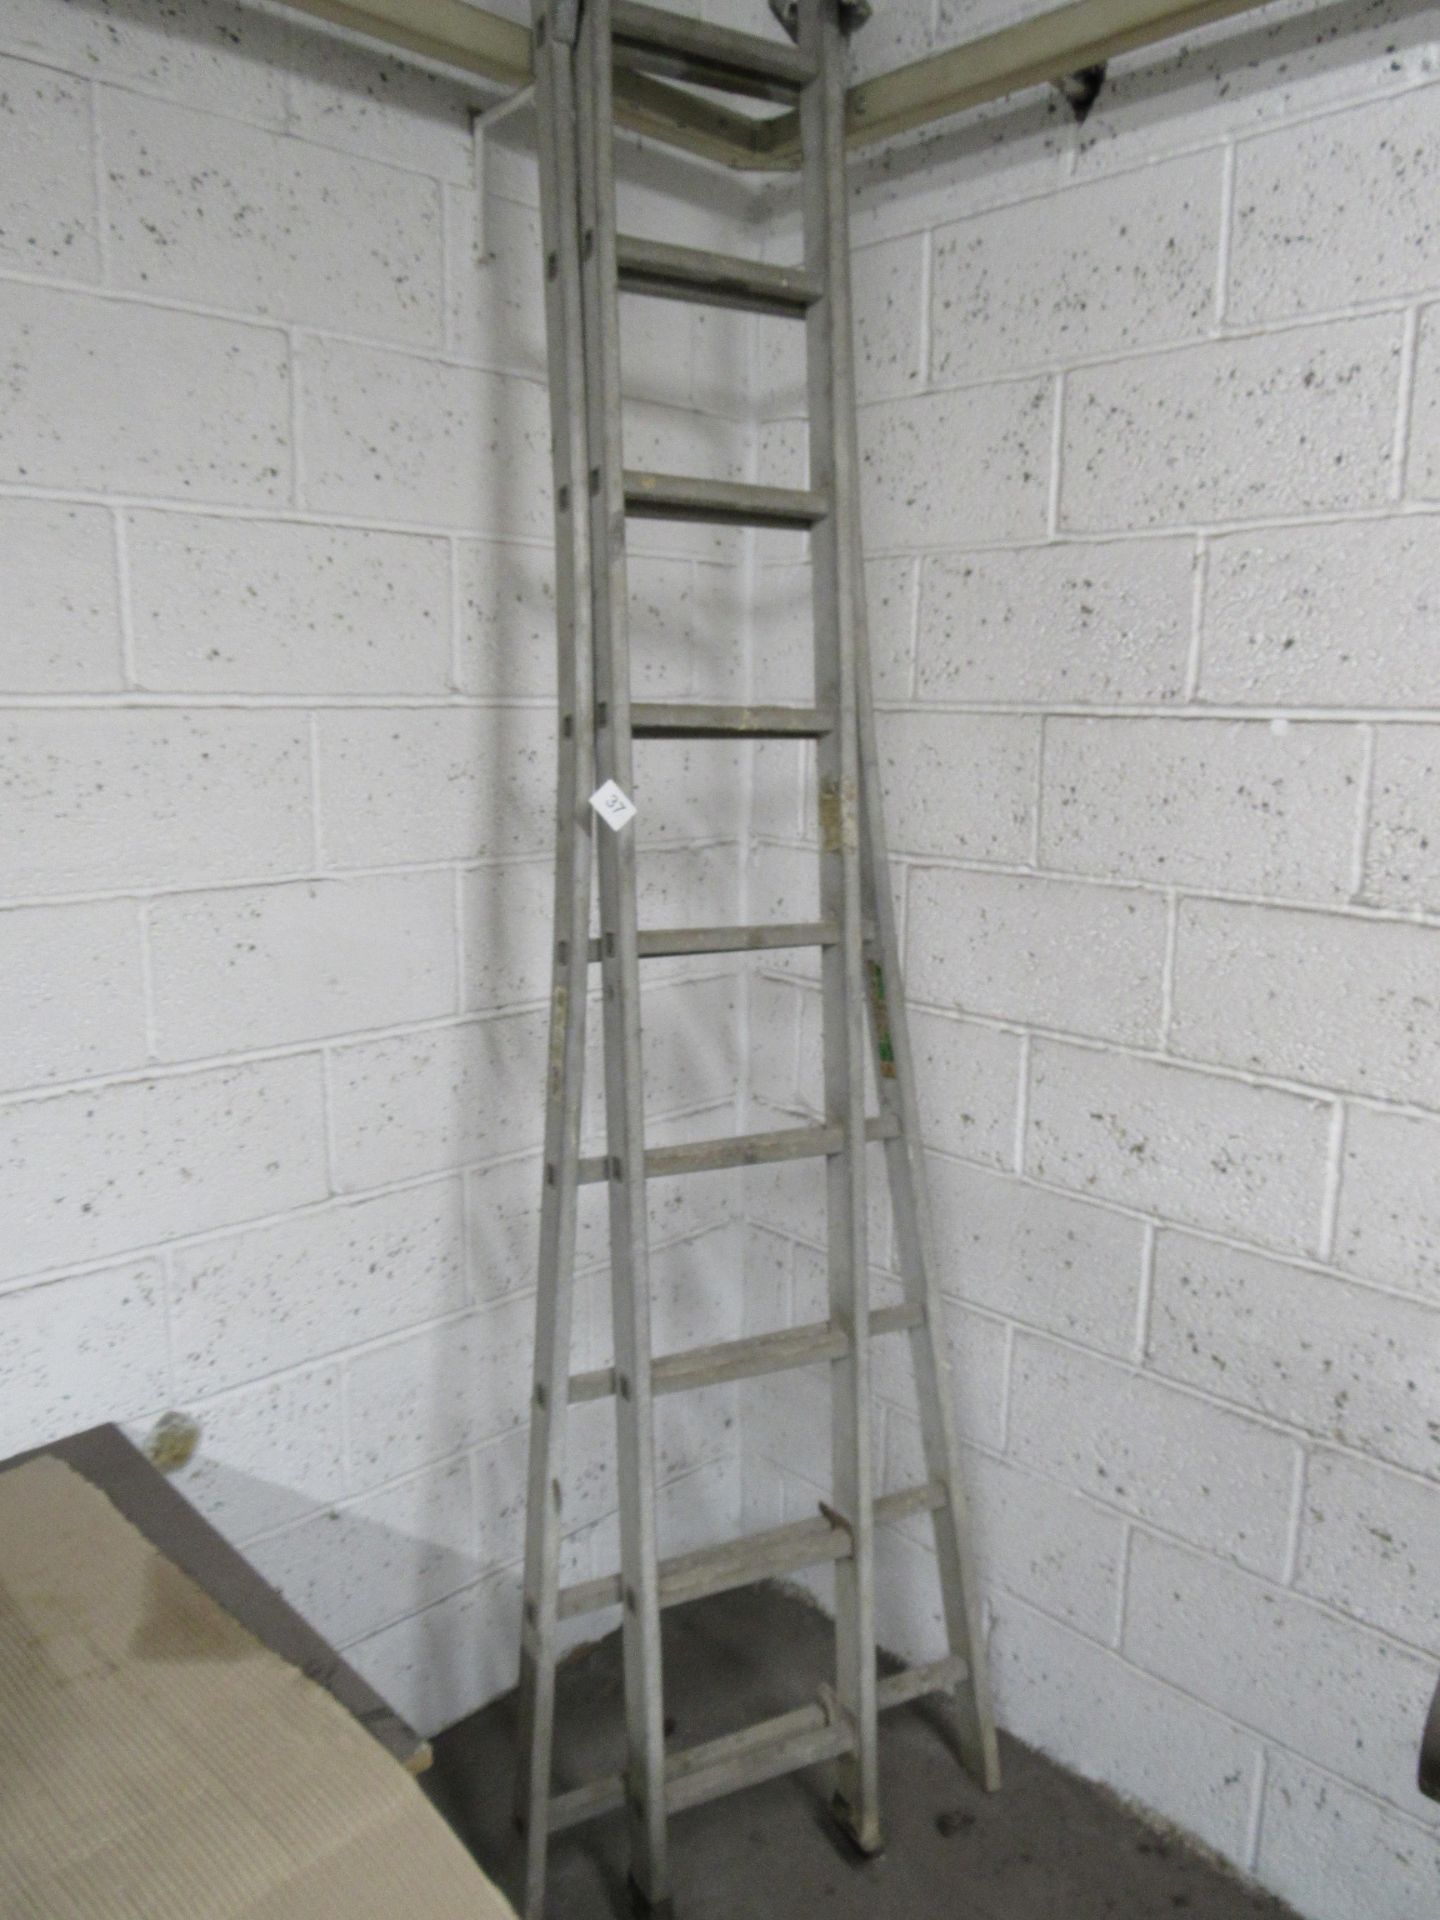 9 Stave Double Extension Ladder - Located on the first floor. The only removal access for large